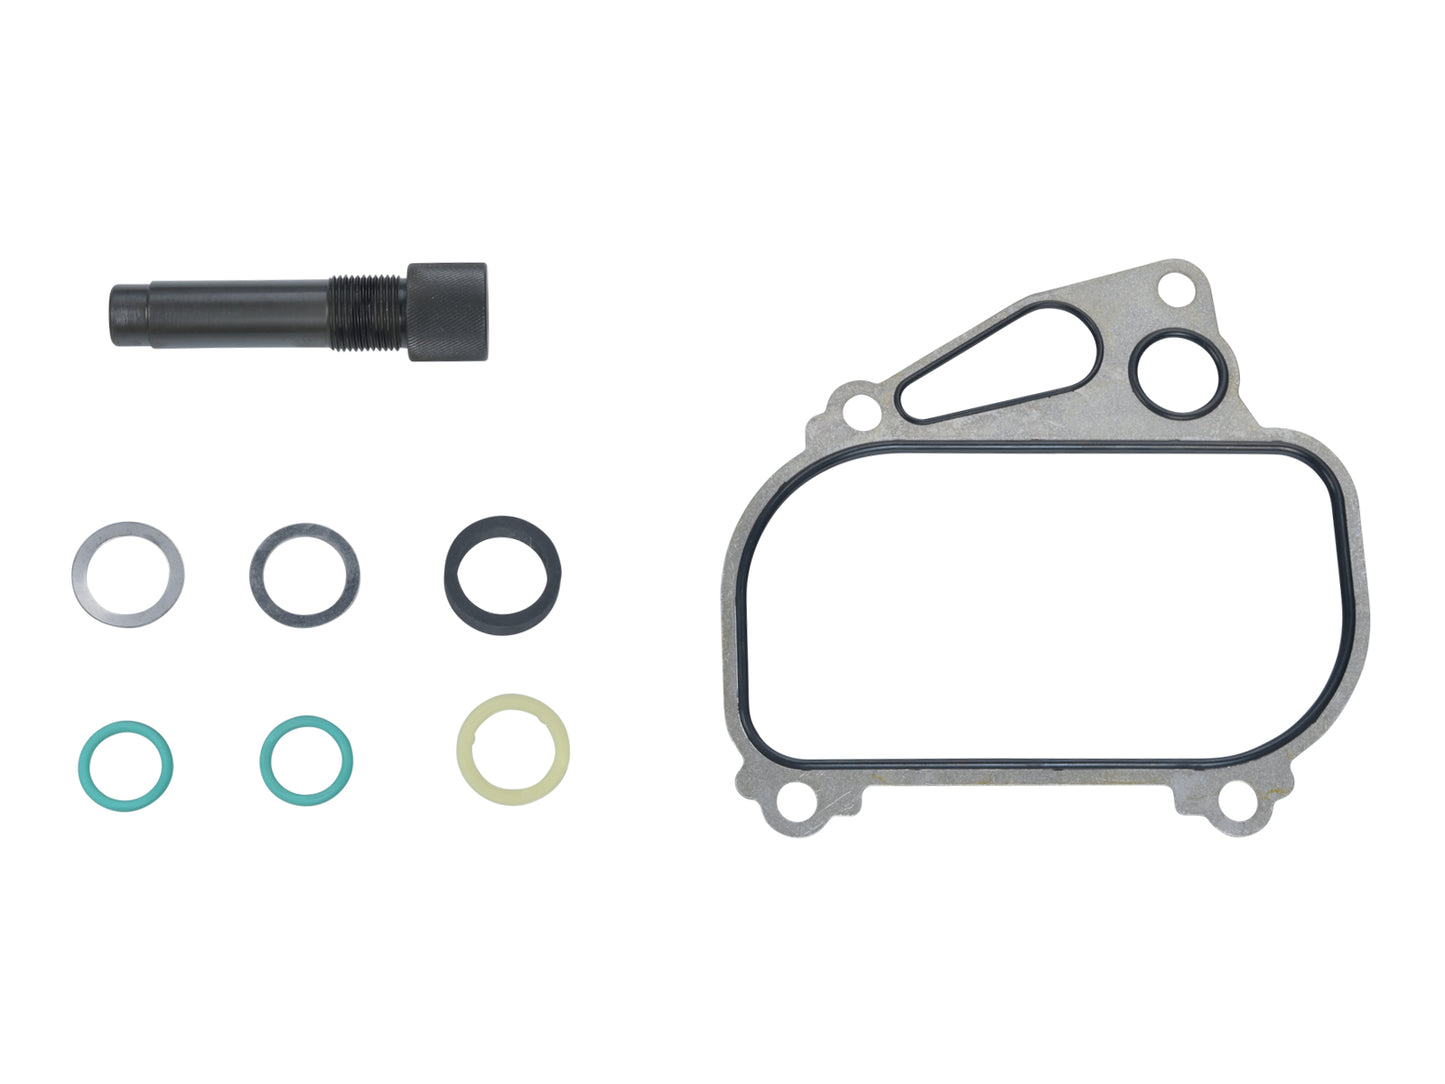 Gasket set with tool for Porsche 944 968 from '86- heat exchanger